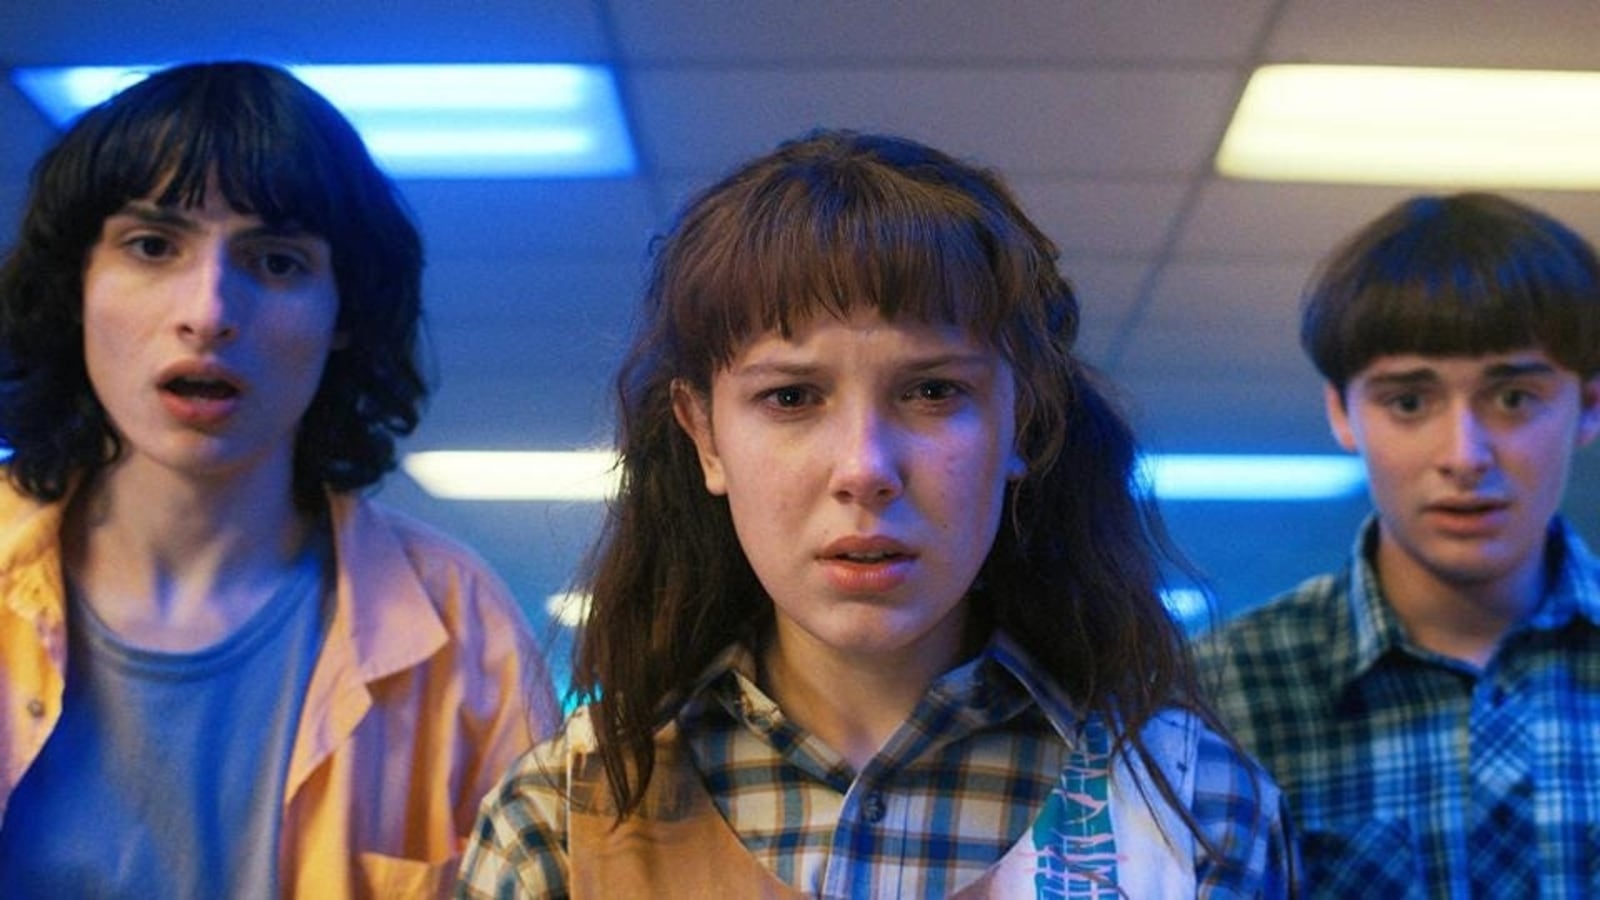 Stranger Things 4 Release Dates Set for May 27 and July 1, Season 5 to Be  Netflix Series' Final Run